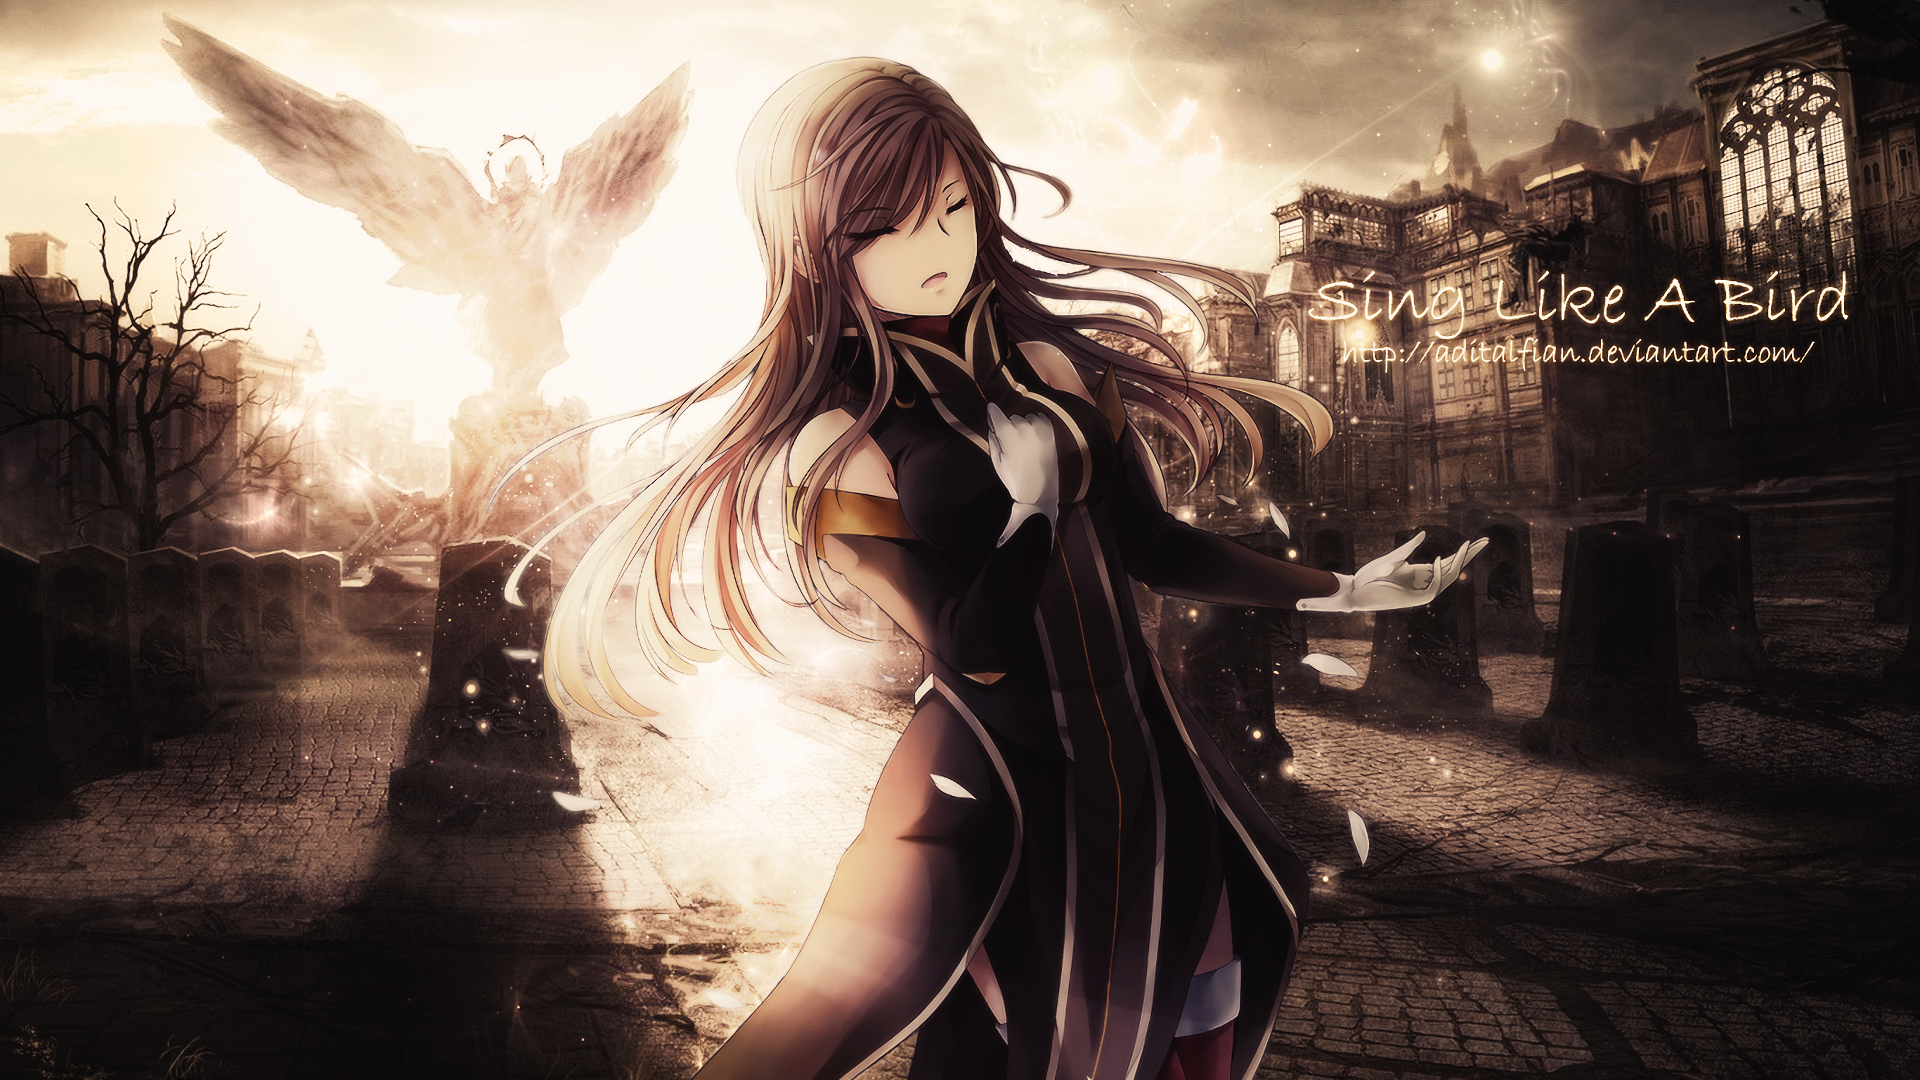 Anime Tales Of The Abyss HD Wallpaper by Aditalfian